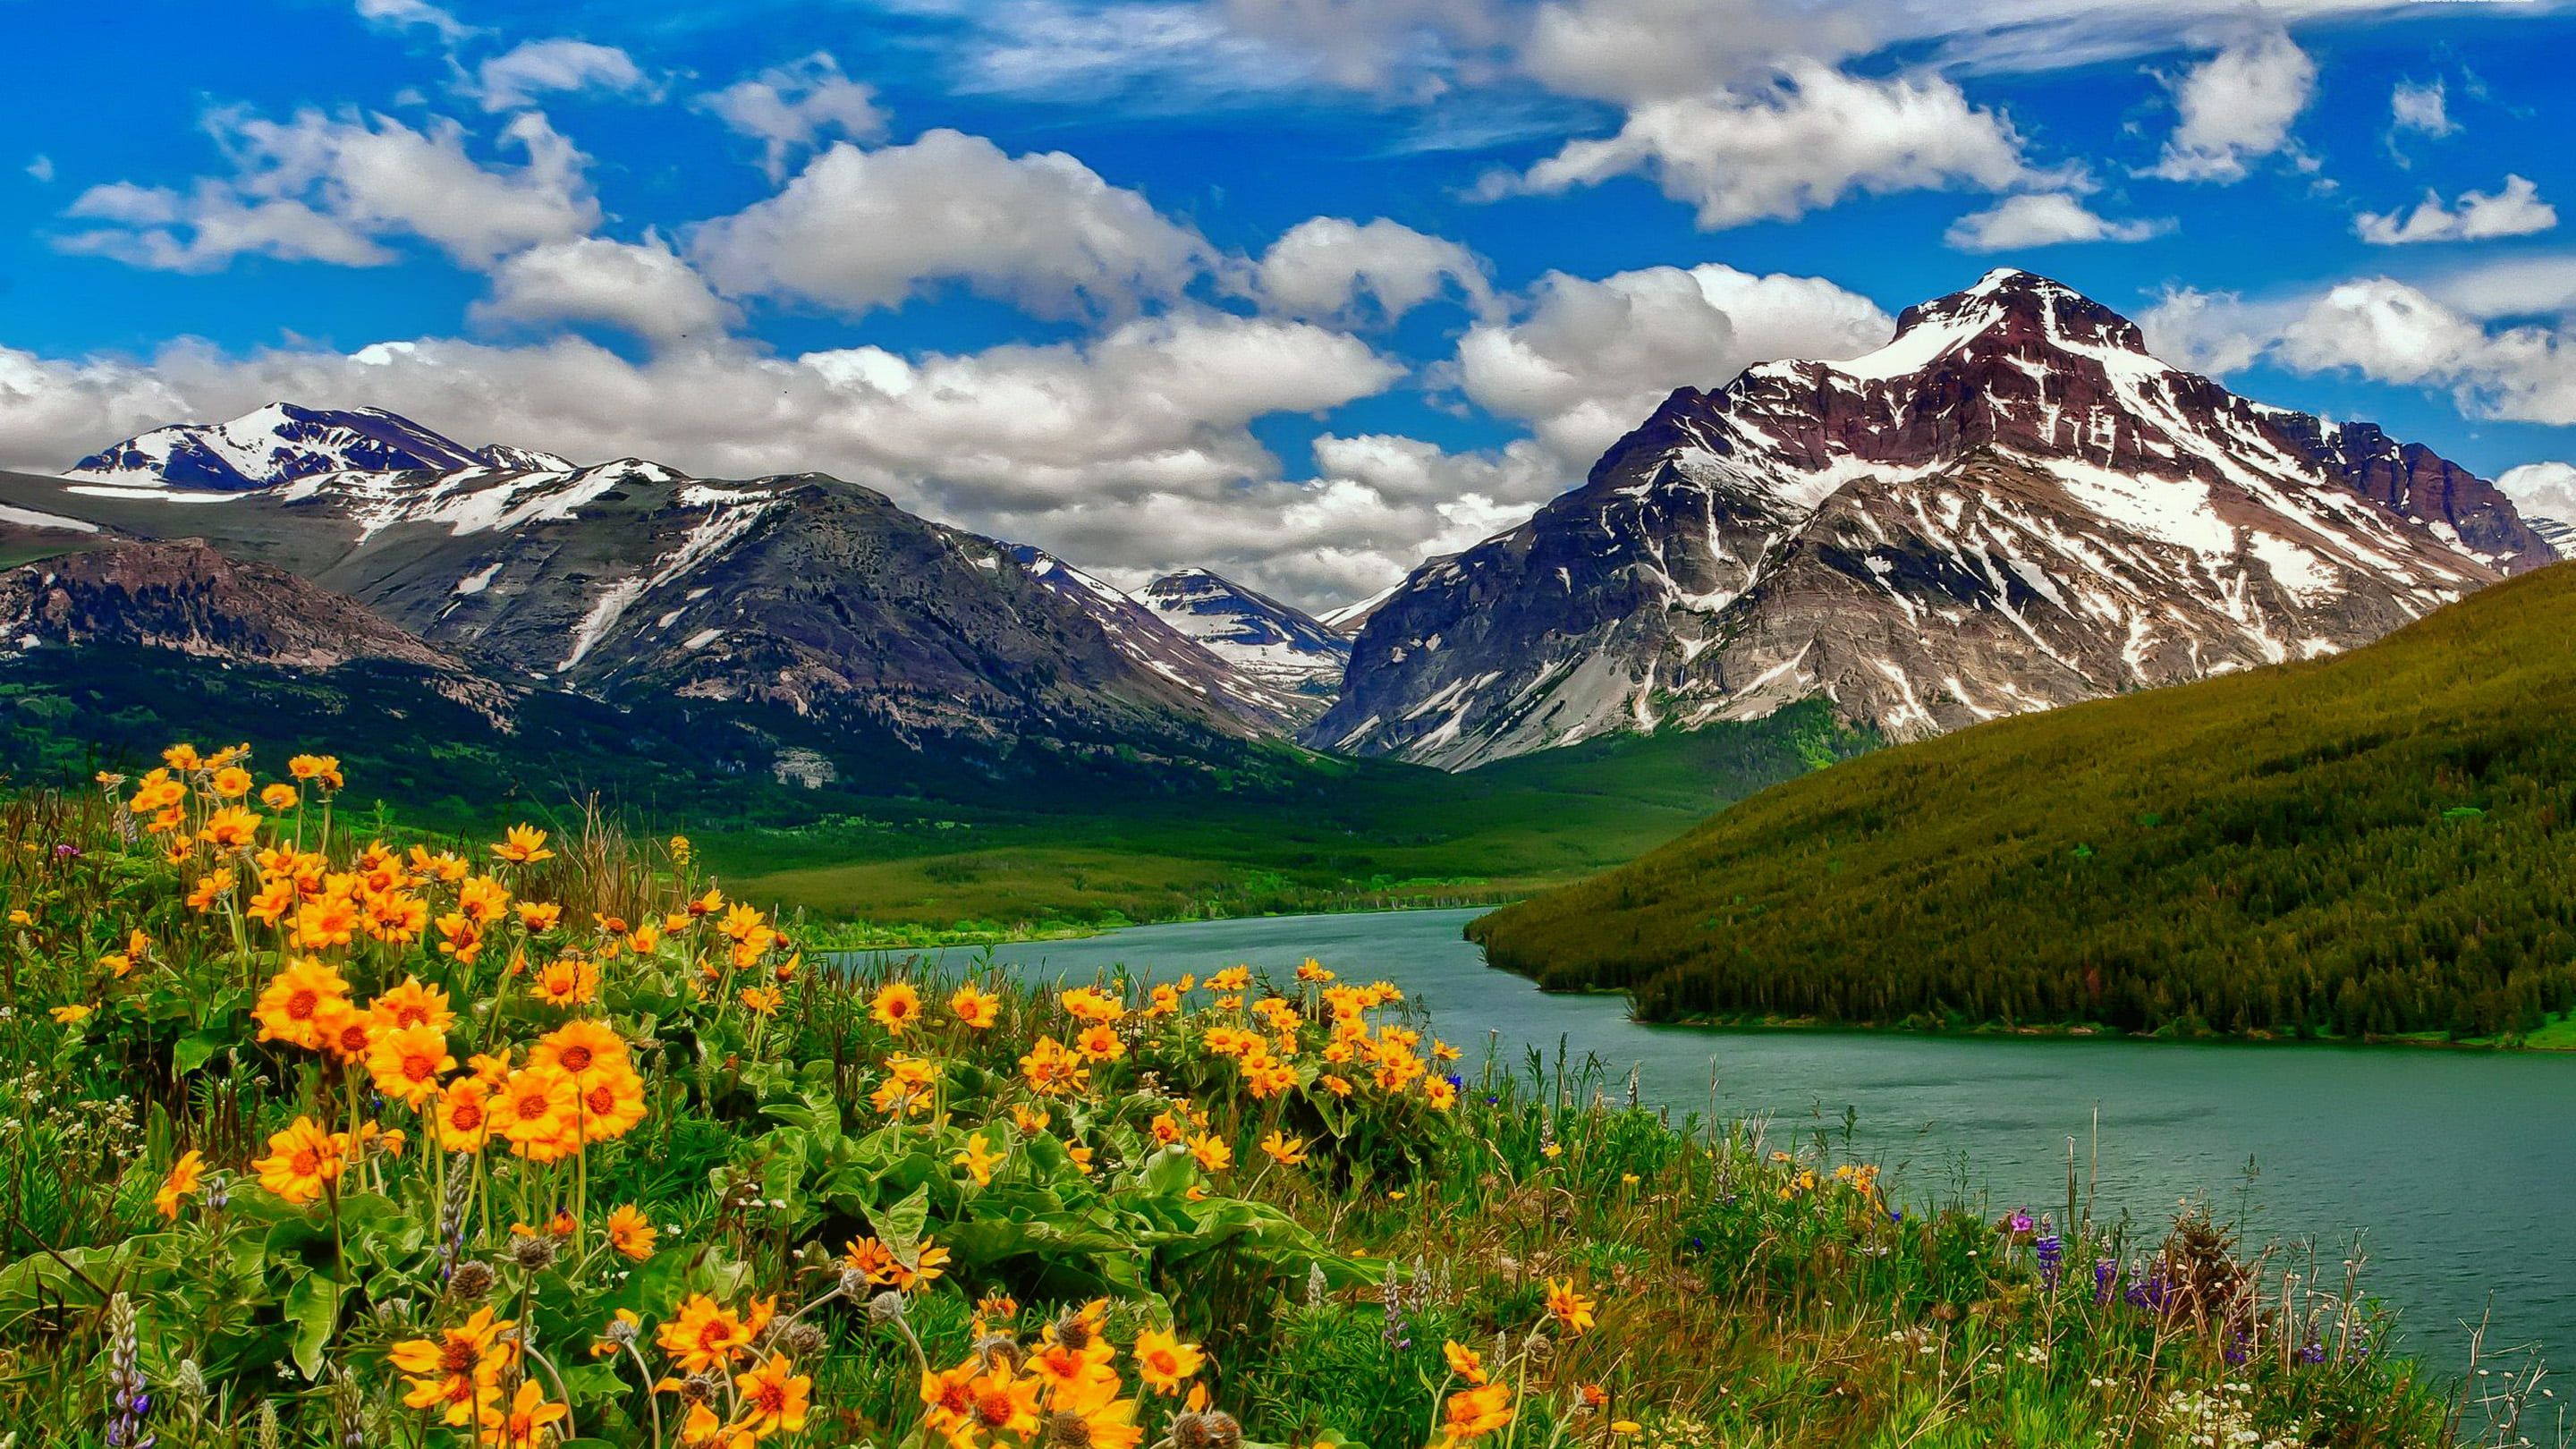 Spring Landscape Wild Flowers Yellow Color Lake Mountains With Remains Of Snow HD Desktop Wallpaper 2. Spring landscape, Landscape photo, Spring landscape photo